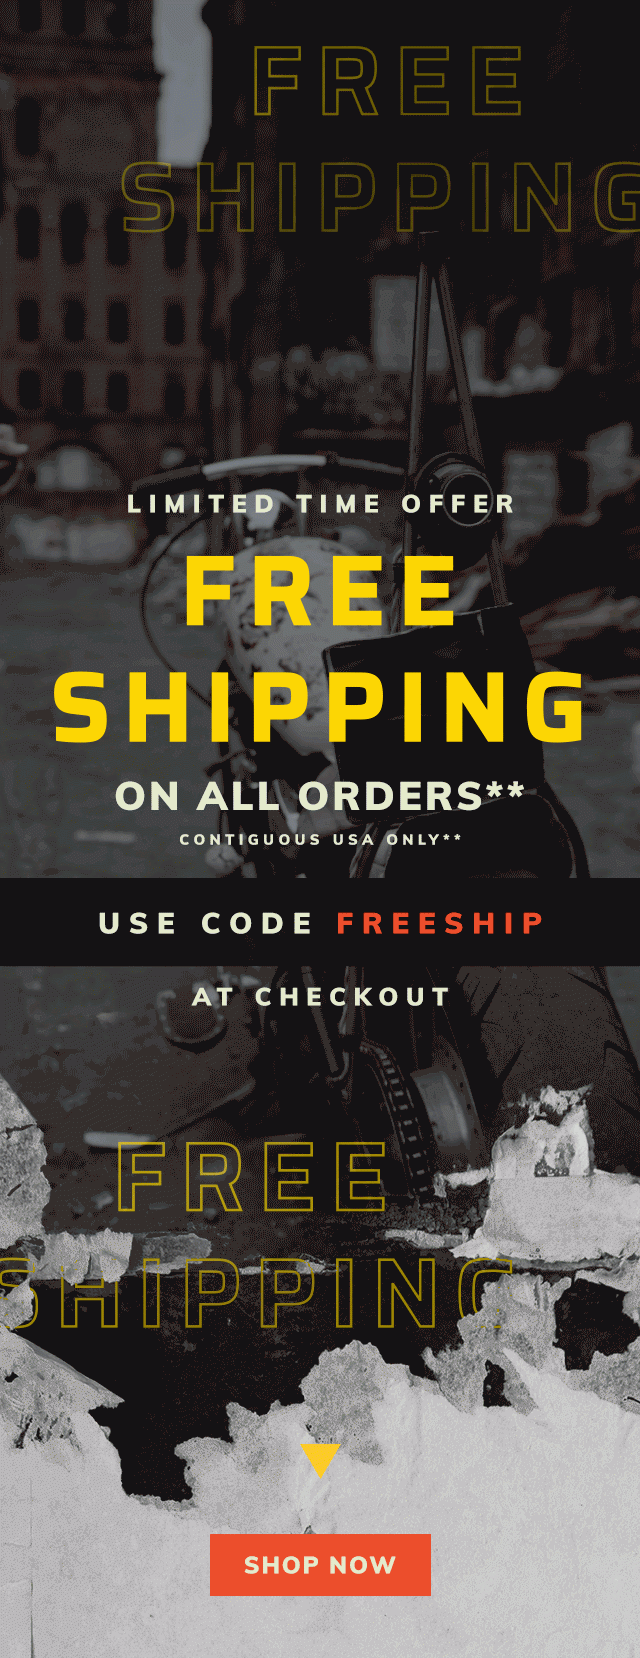 Free Shipping on all orders**